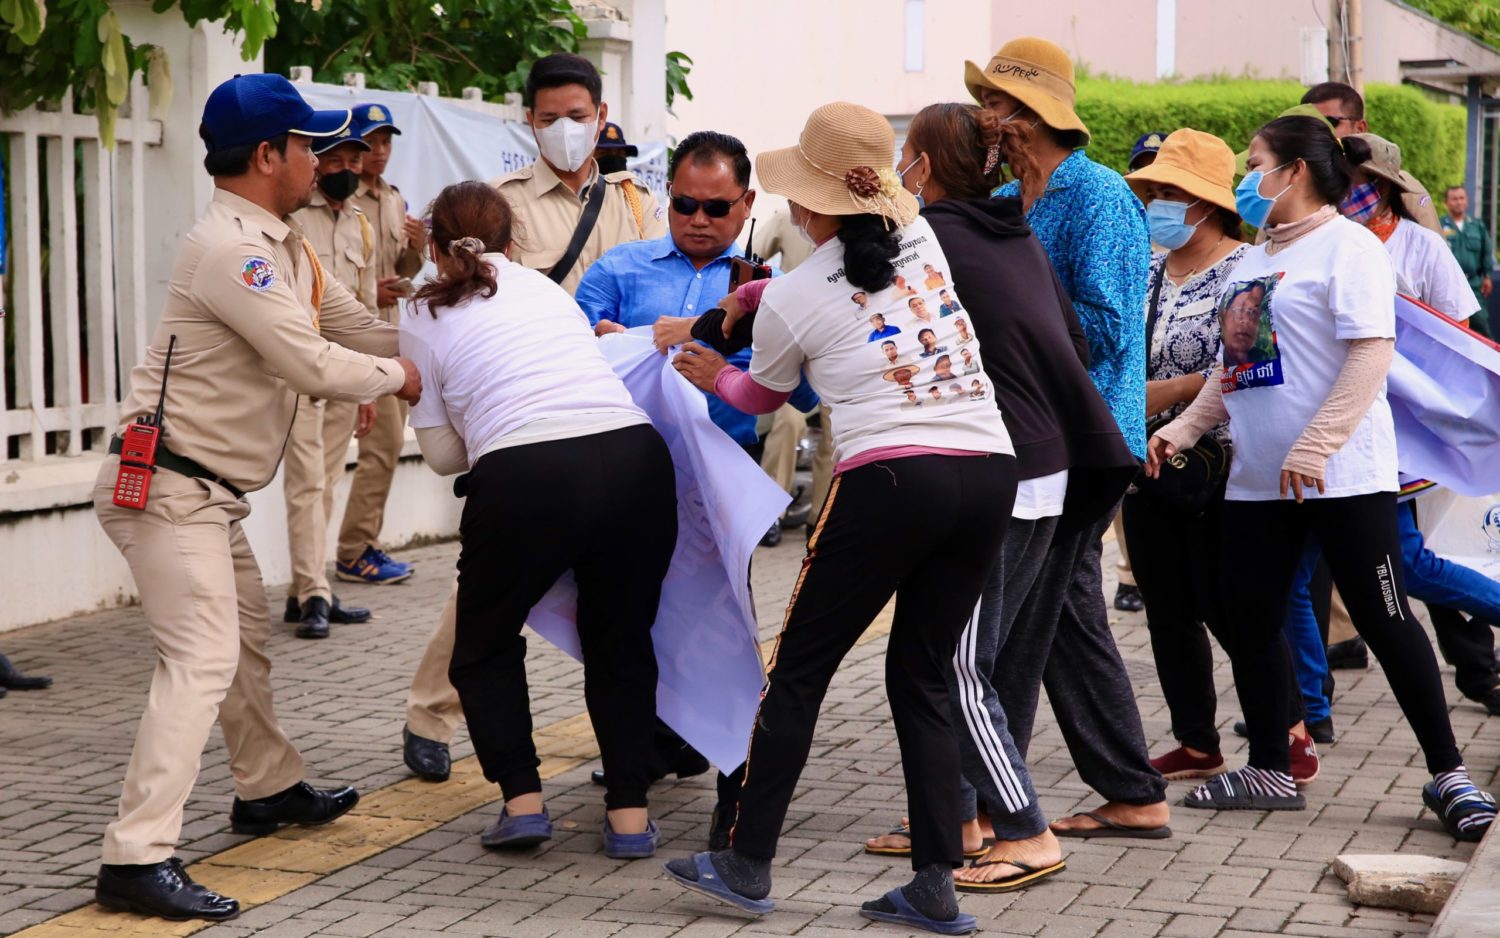 Daun Penh authorities pull banners held Friday Women protesters on July 1, 2022.